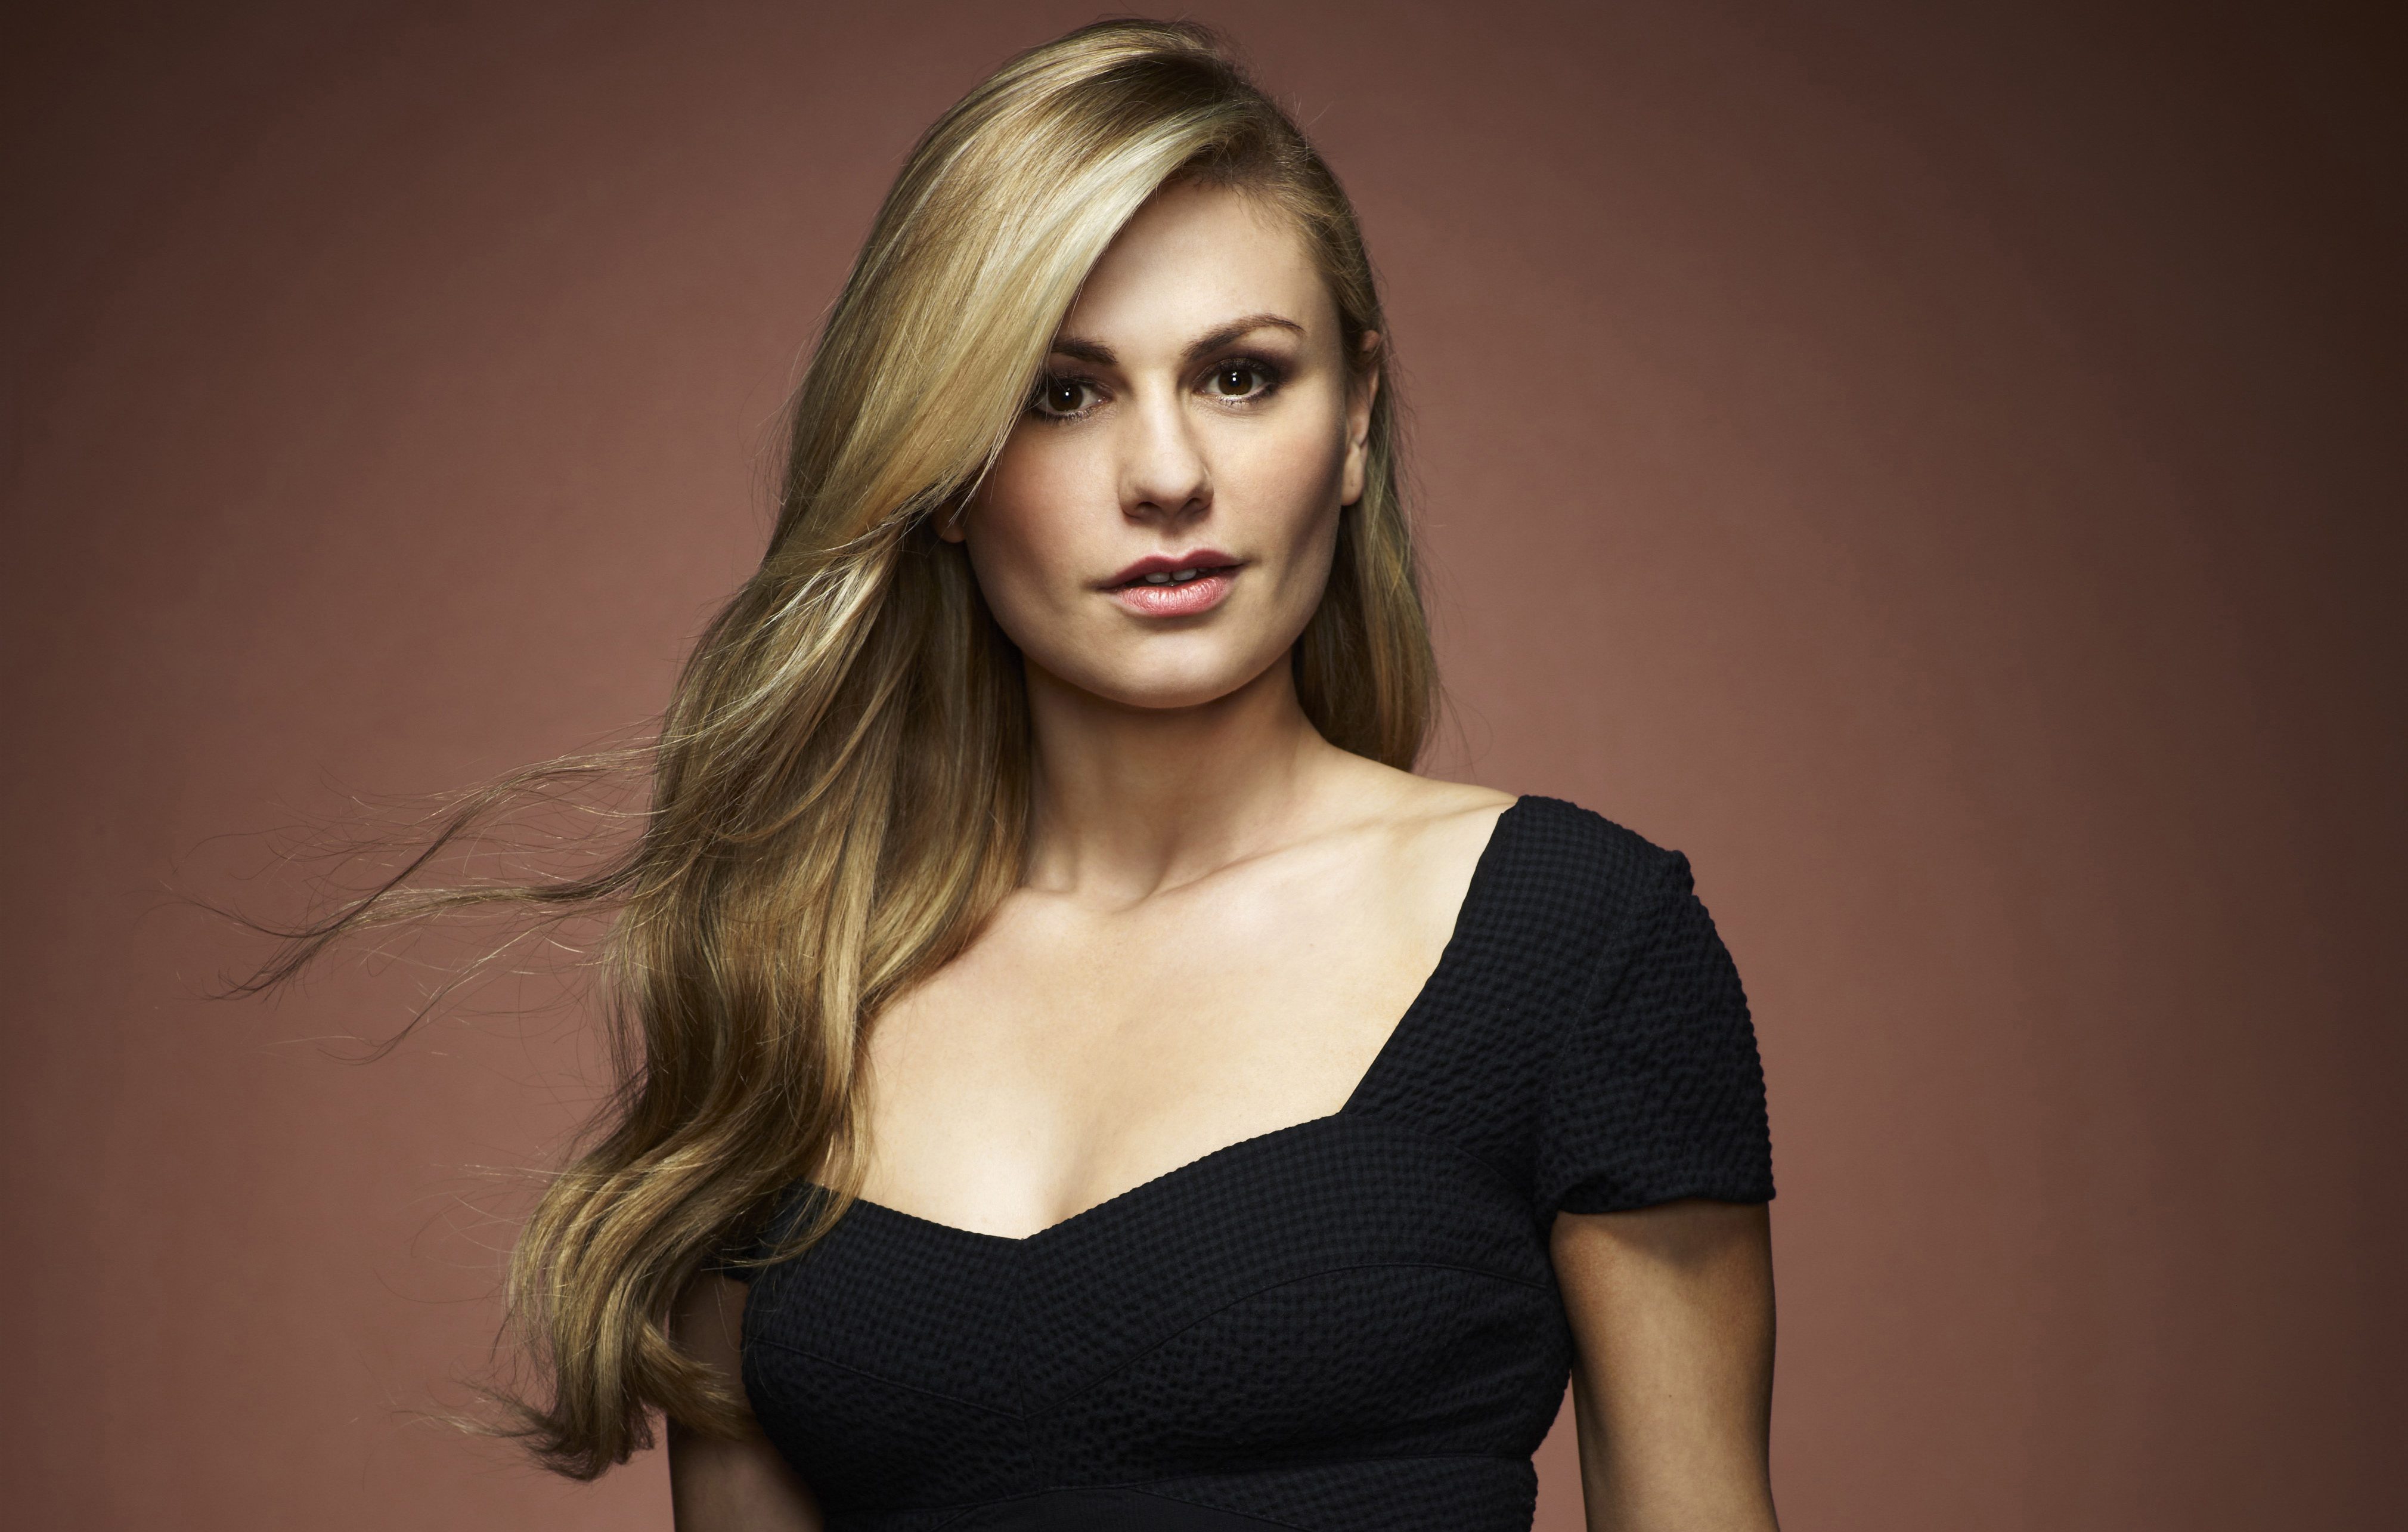 celebrity, anna paquin, actress, american, blonde, brown eyes